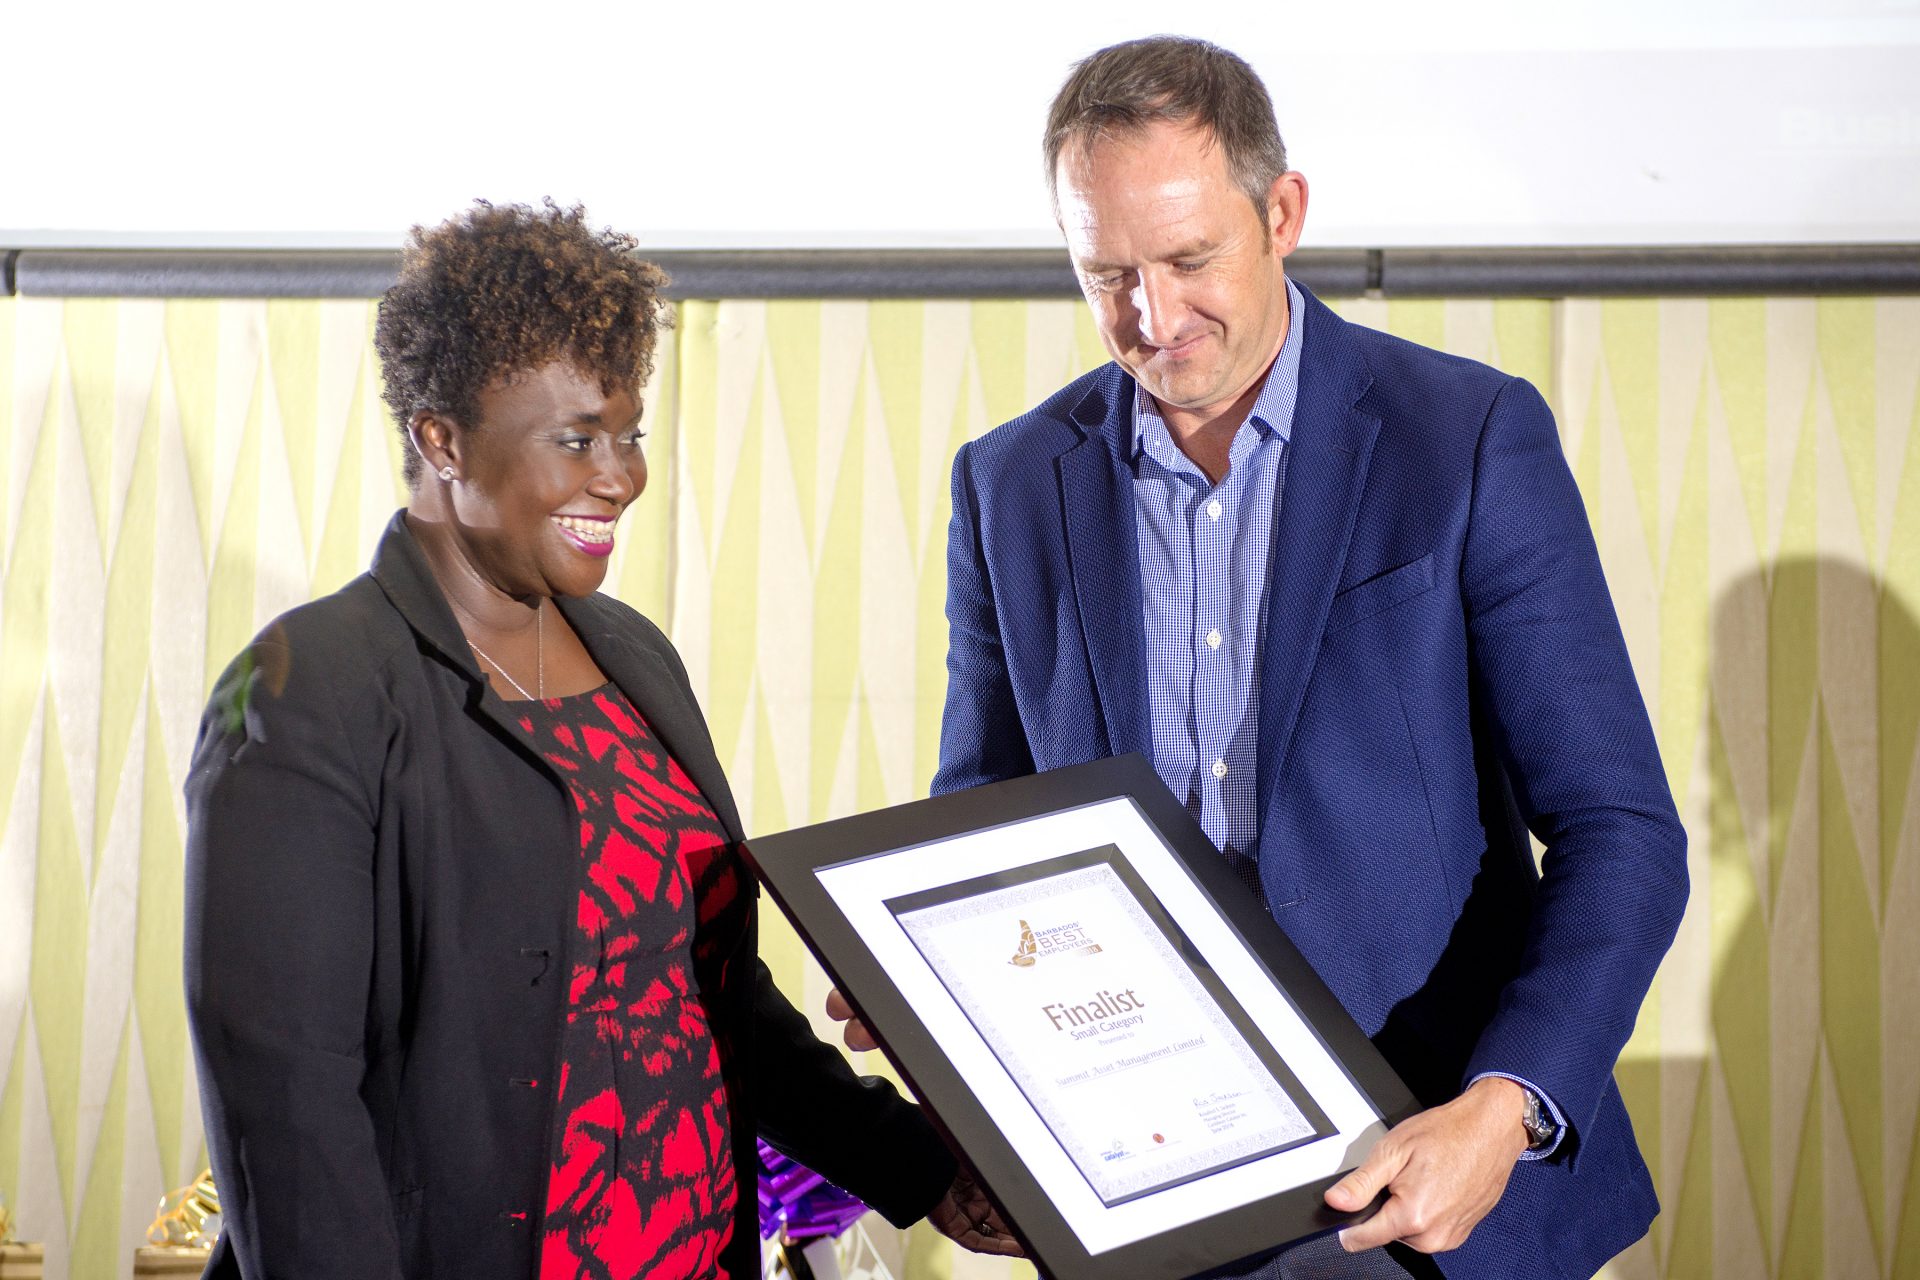 Valerie Hope presenting John Howard at Summit with a Certificate as one of the Finalist in the Small category